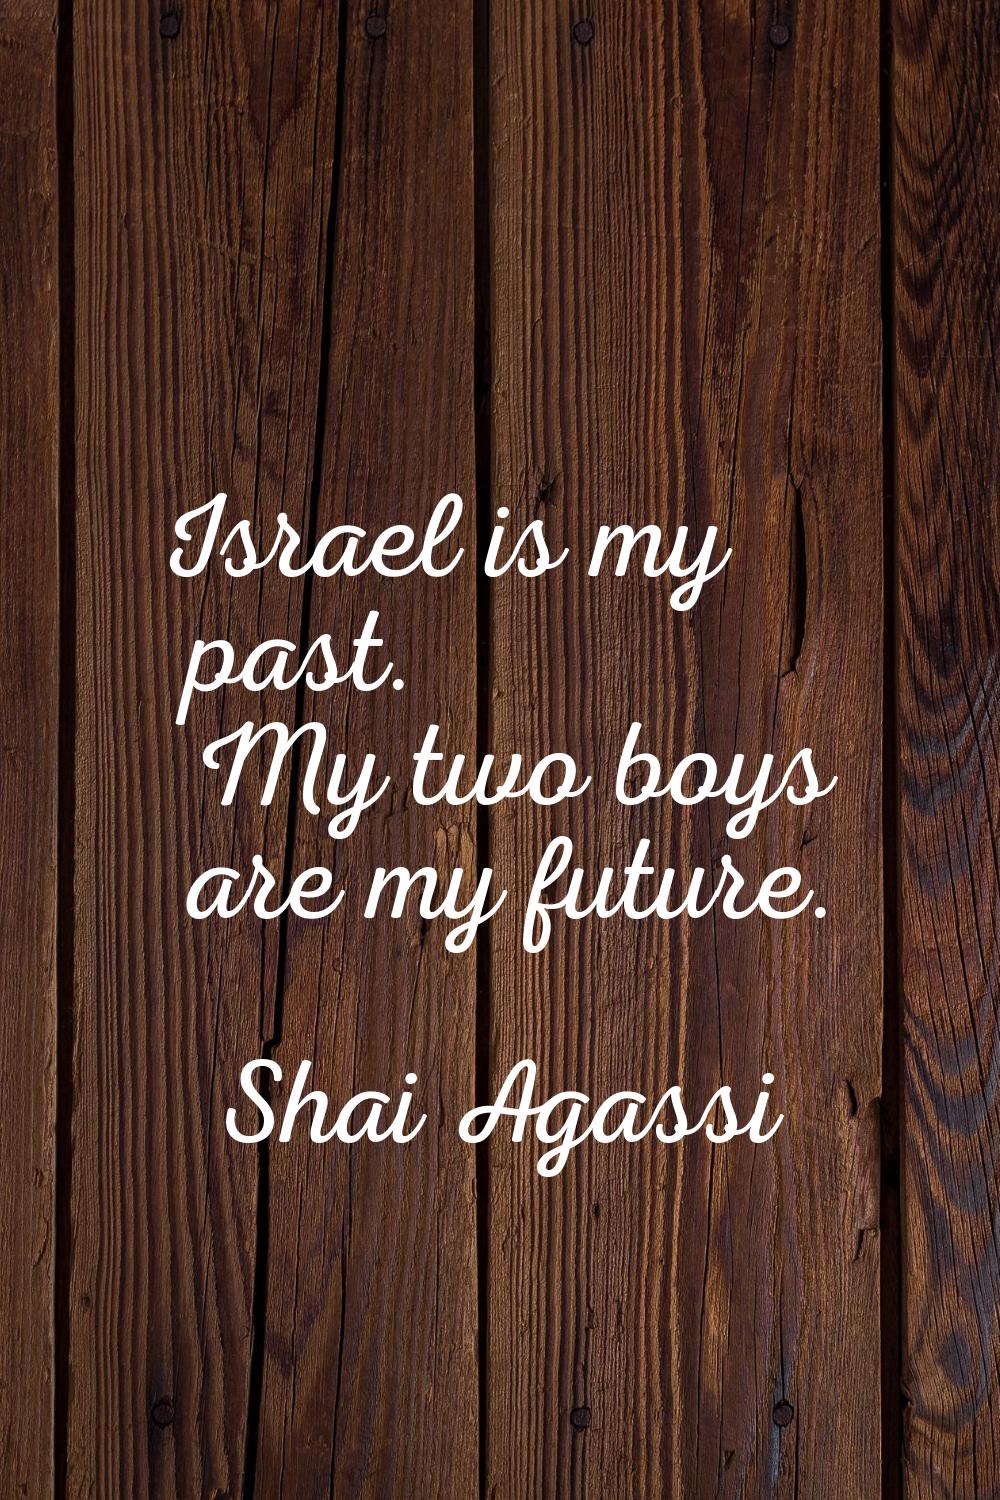 Israel is my past. My two boys are my future.